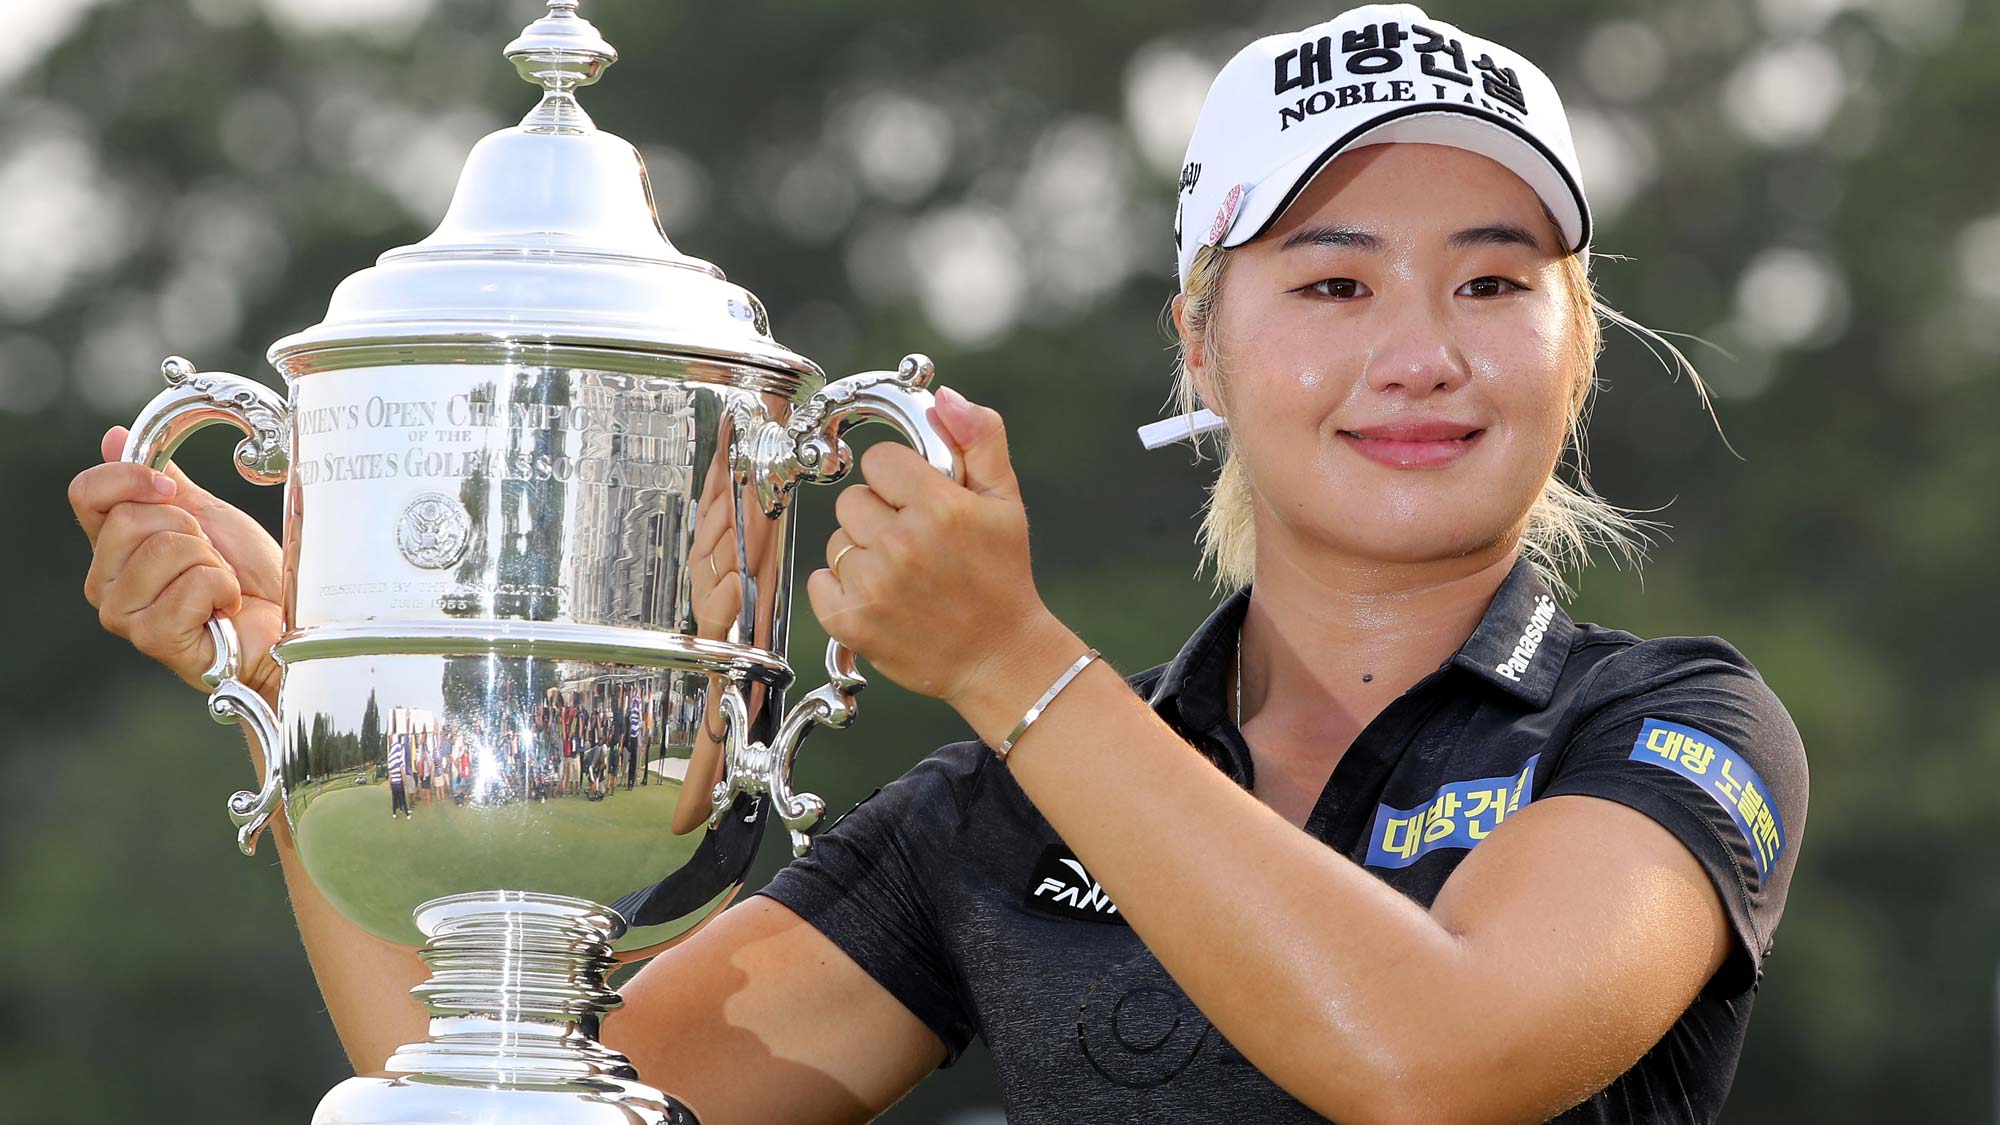 Jeongeun Lee6 has her #BagsPacked for the 2020 Diamond Resorts Tournament of Champions after her victory at the 2019 U.S. Women's Open